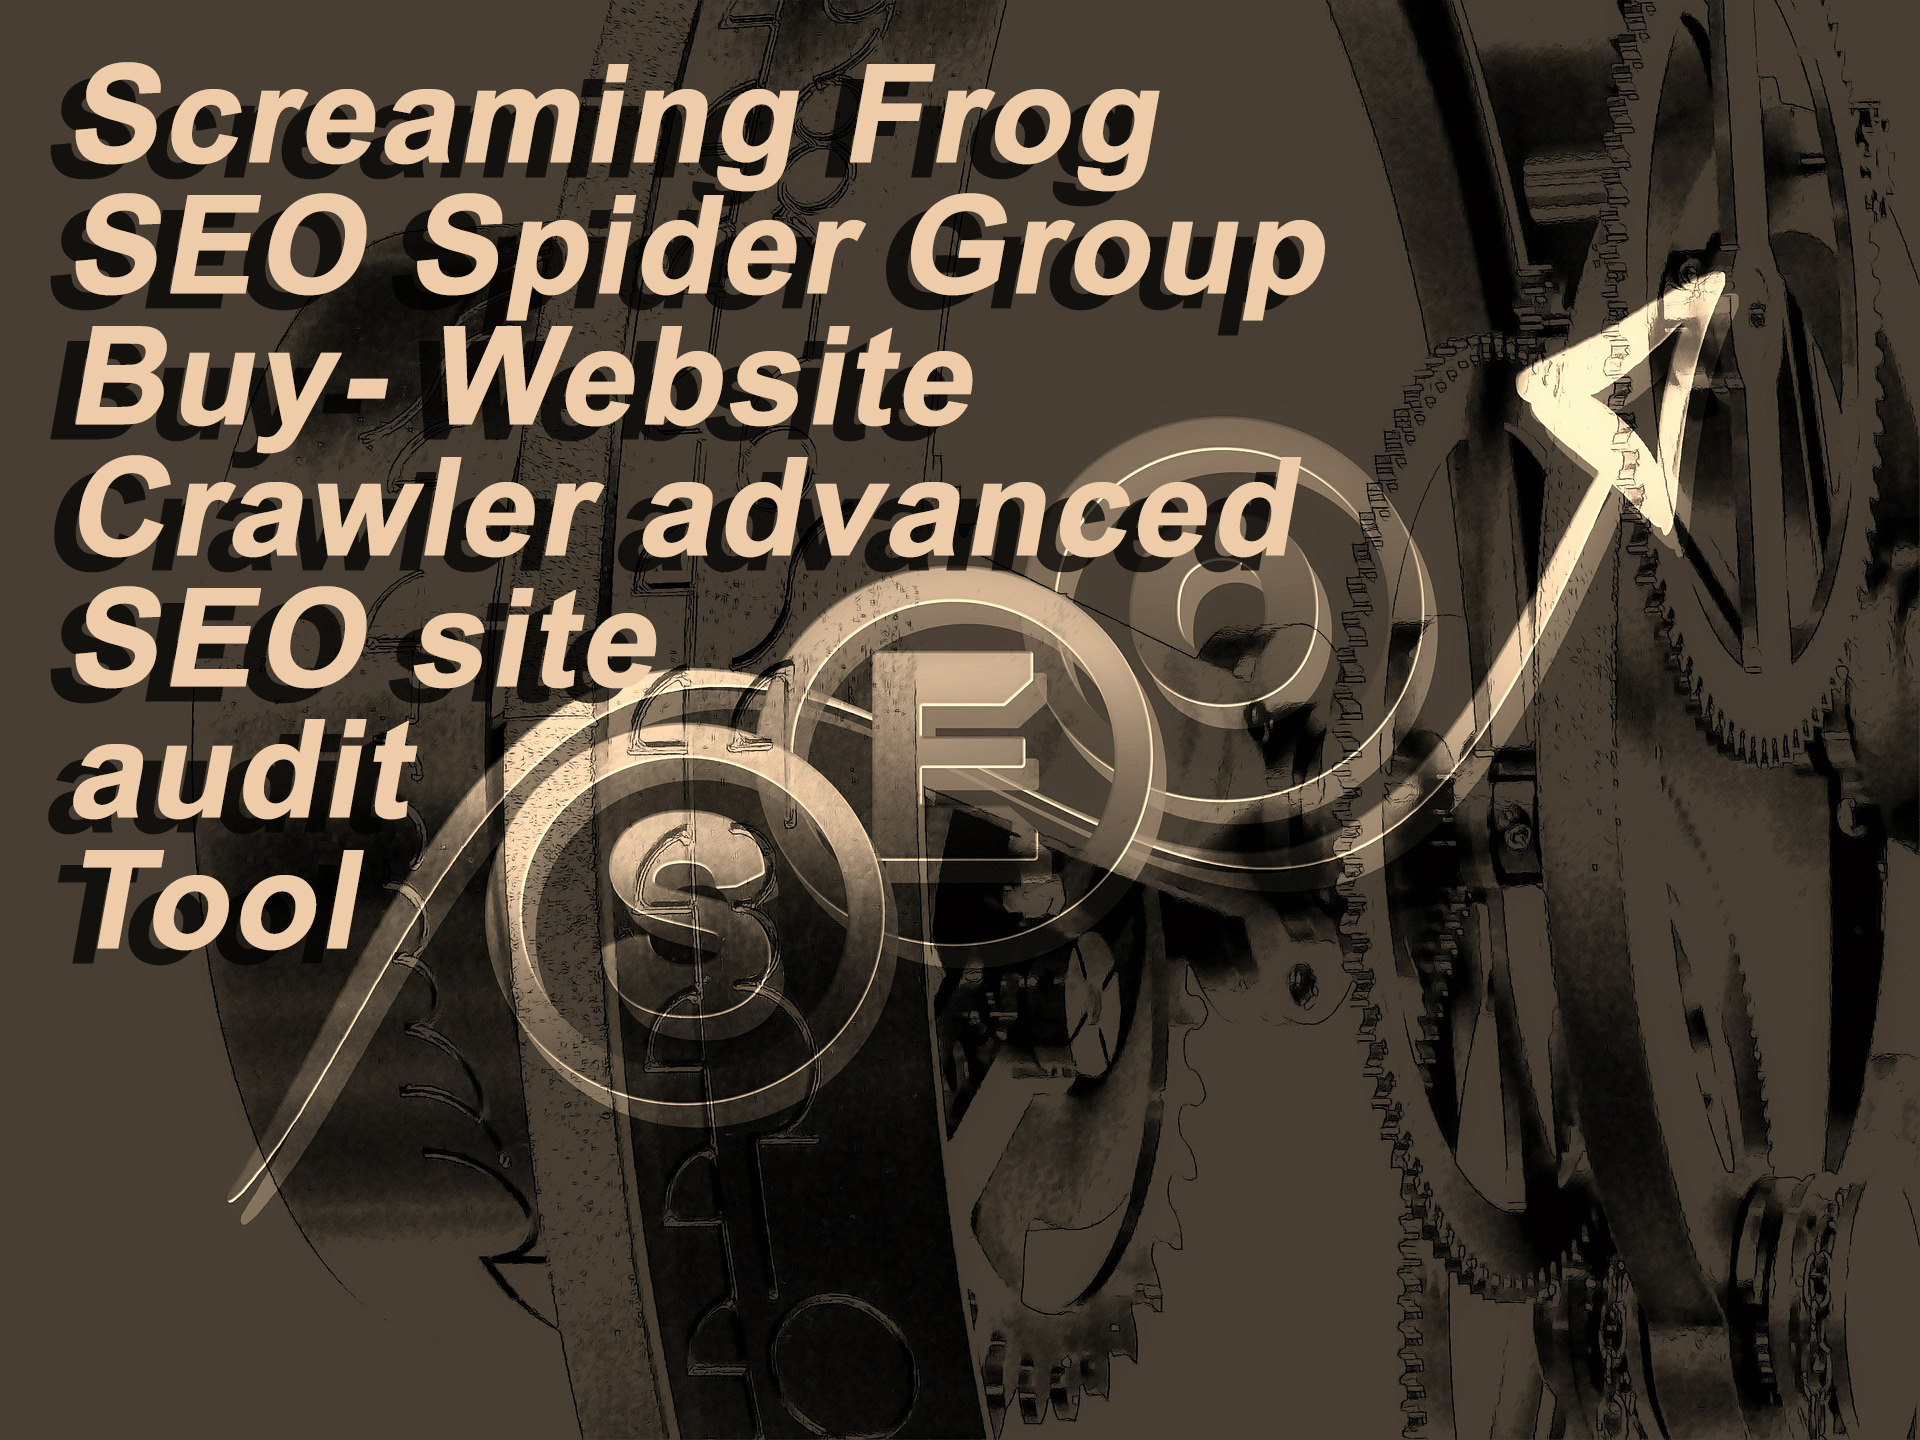 reviews of screaming frog seo spider